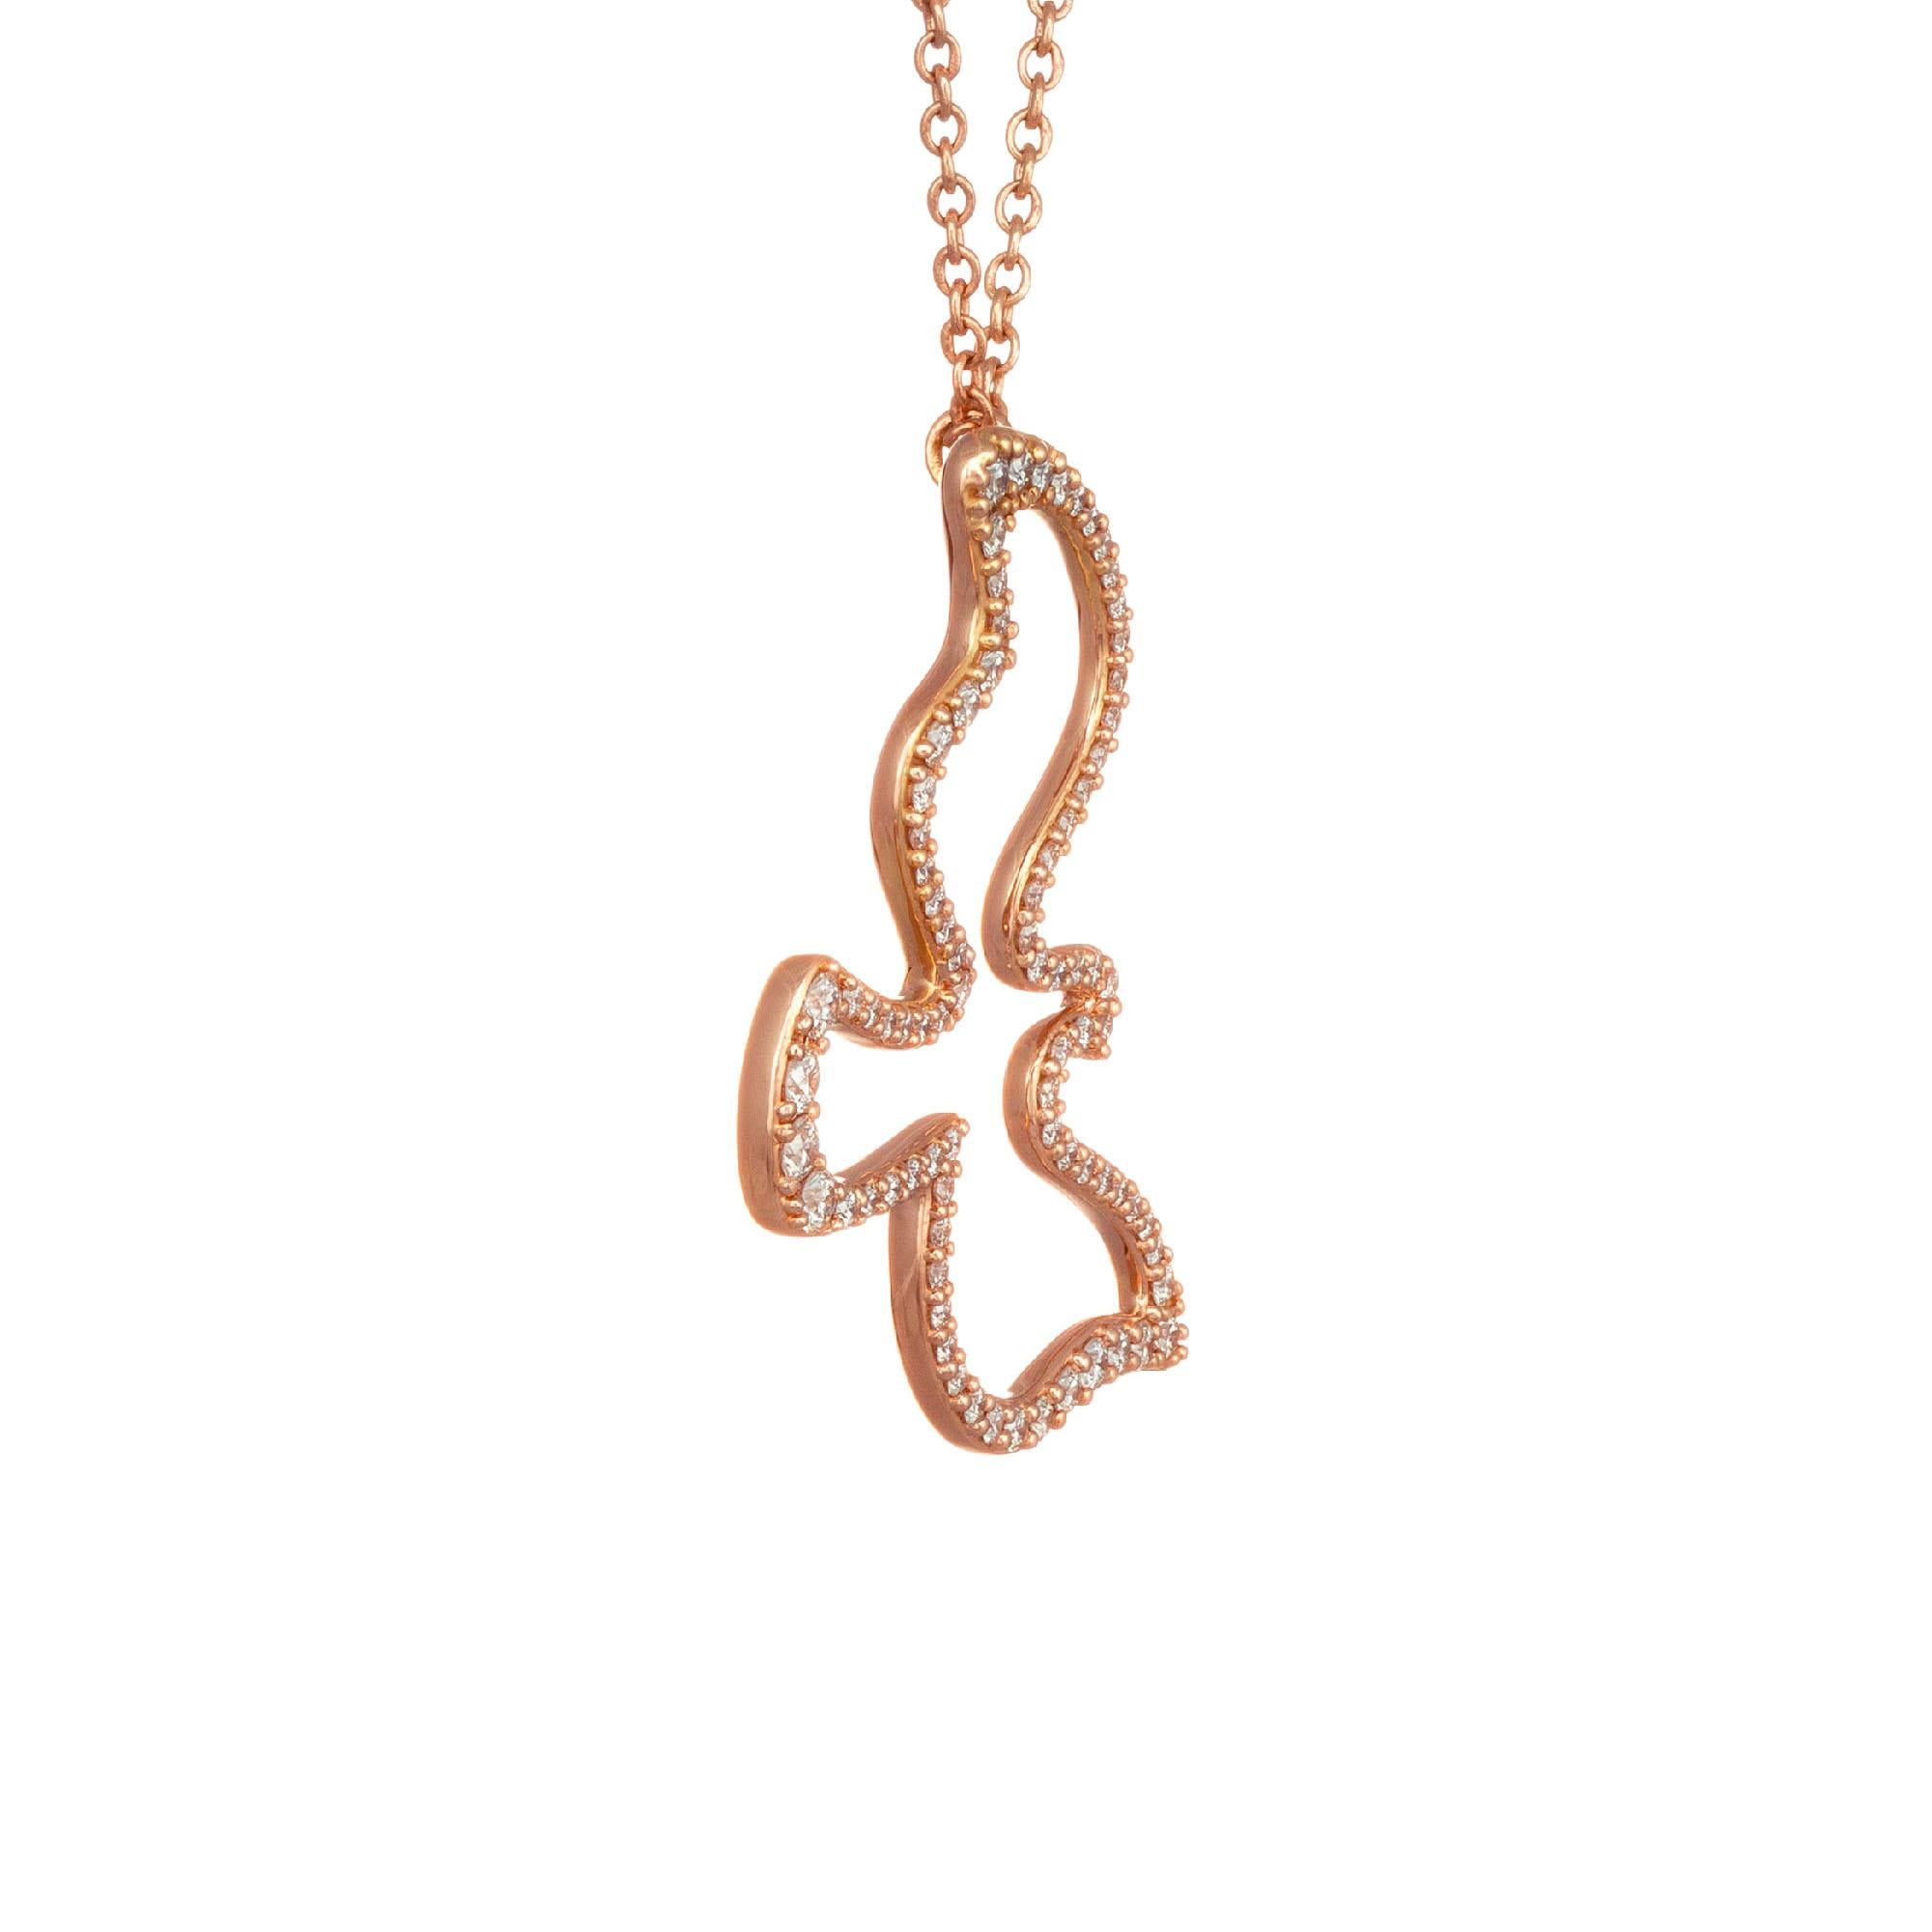 Tiffany & Co 18k rose gold swooping dove by Paloma Picasso is encrusted with 80 round brilliant cut diamonds over the entire circumference of the dove. A 16 Inch chain is attached to the back end of a wing to appear swooping.

80 round brilliant cut